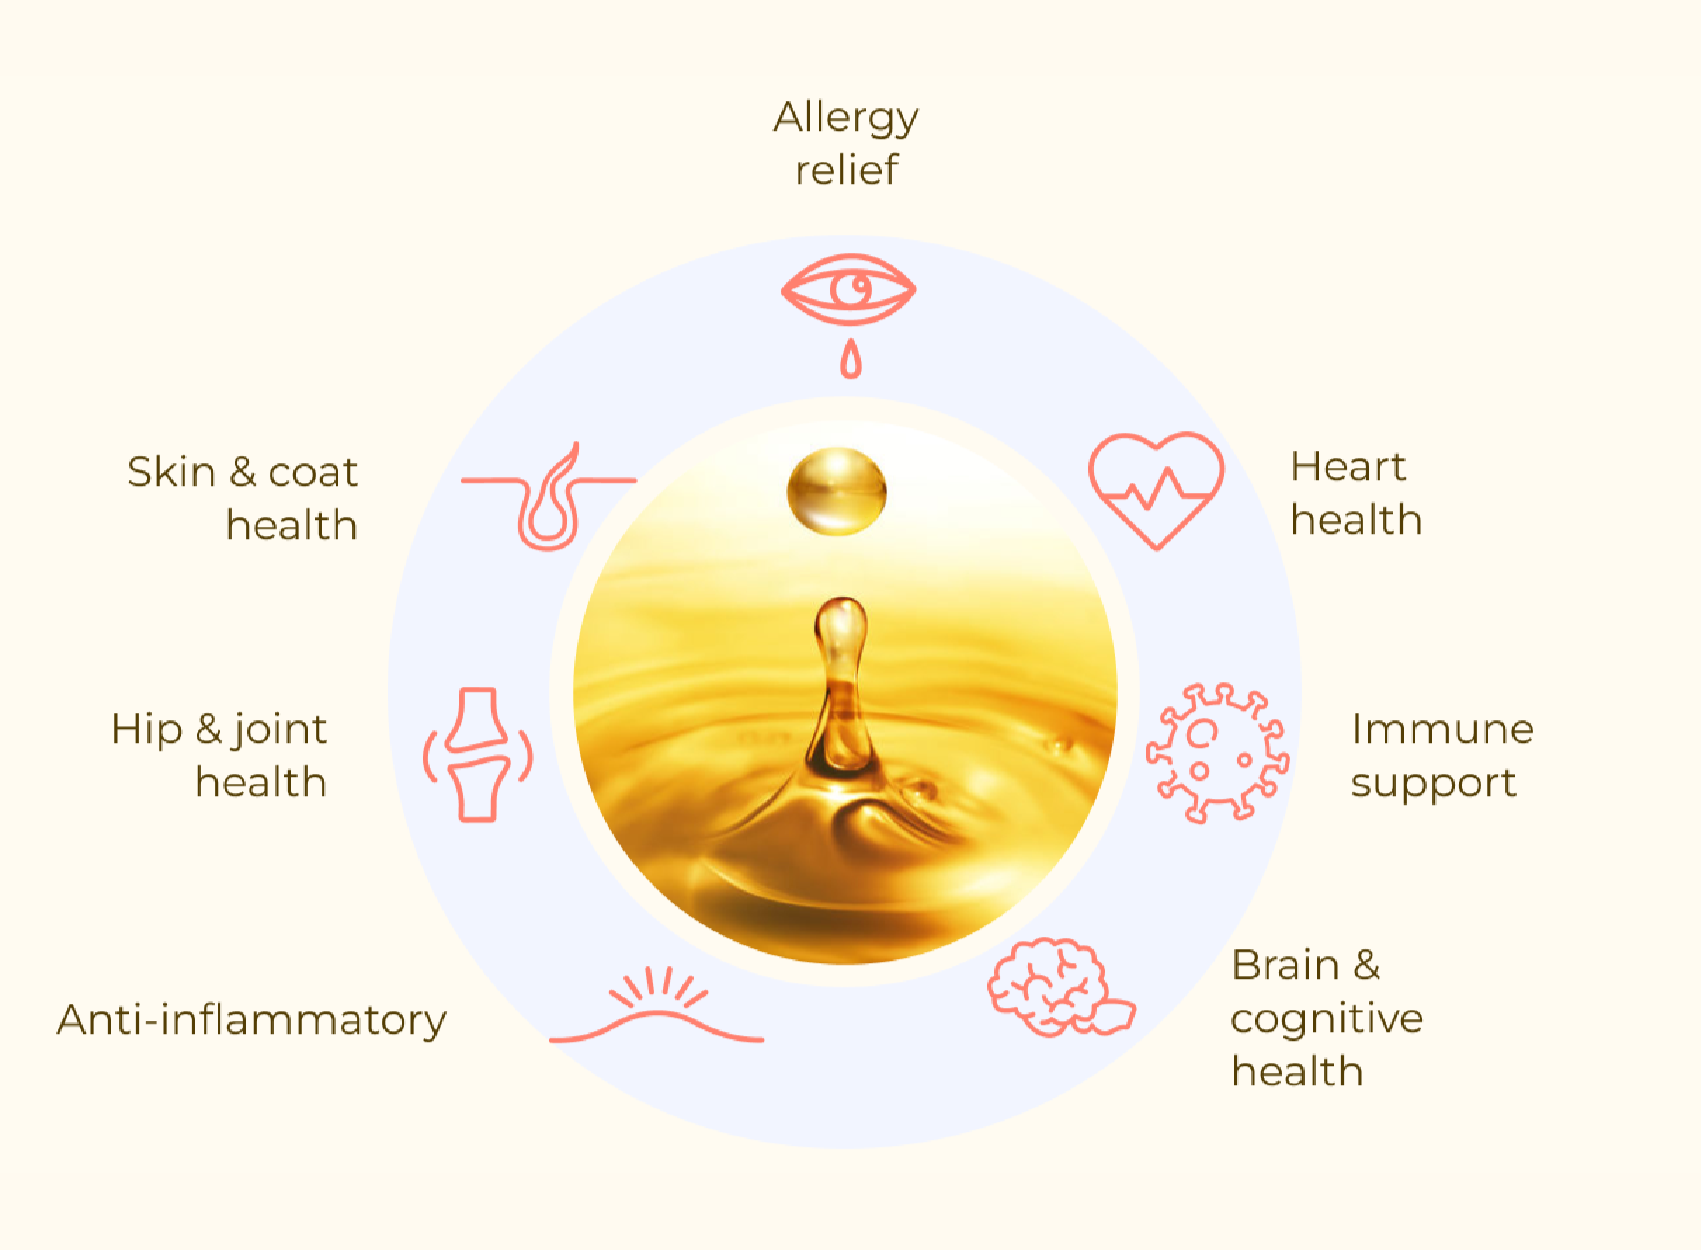 Benefits of Fish Oil: allergy relief, skin & coat health, hip & joint health, anti-inflammatory, heart health, immune support, brain & cognitive health